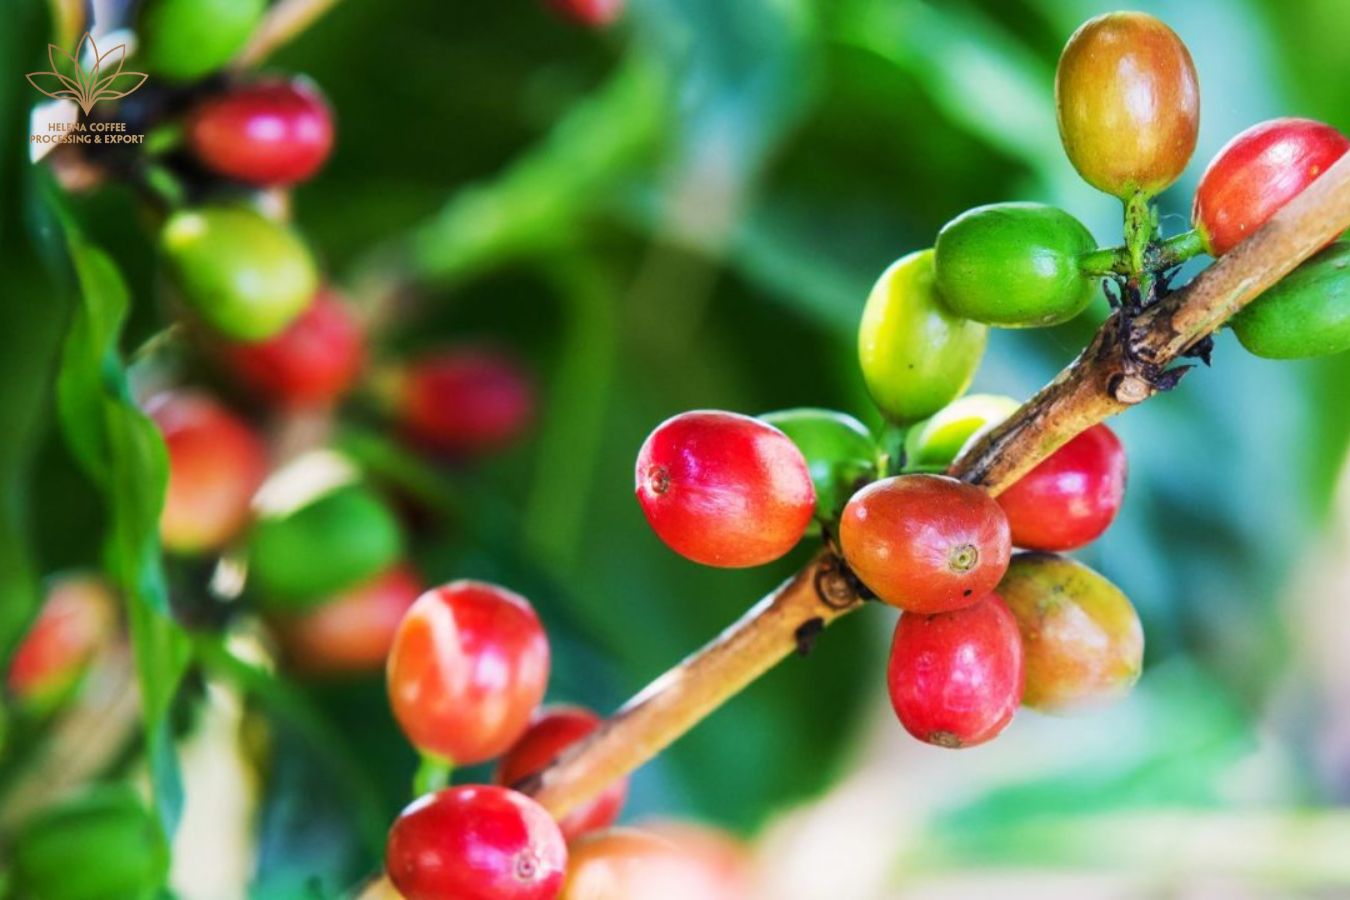 Robusta Coffee Price Today - August 20, 2022 Robusta Rises Again